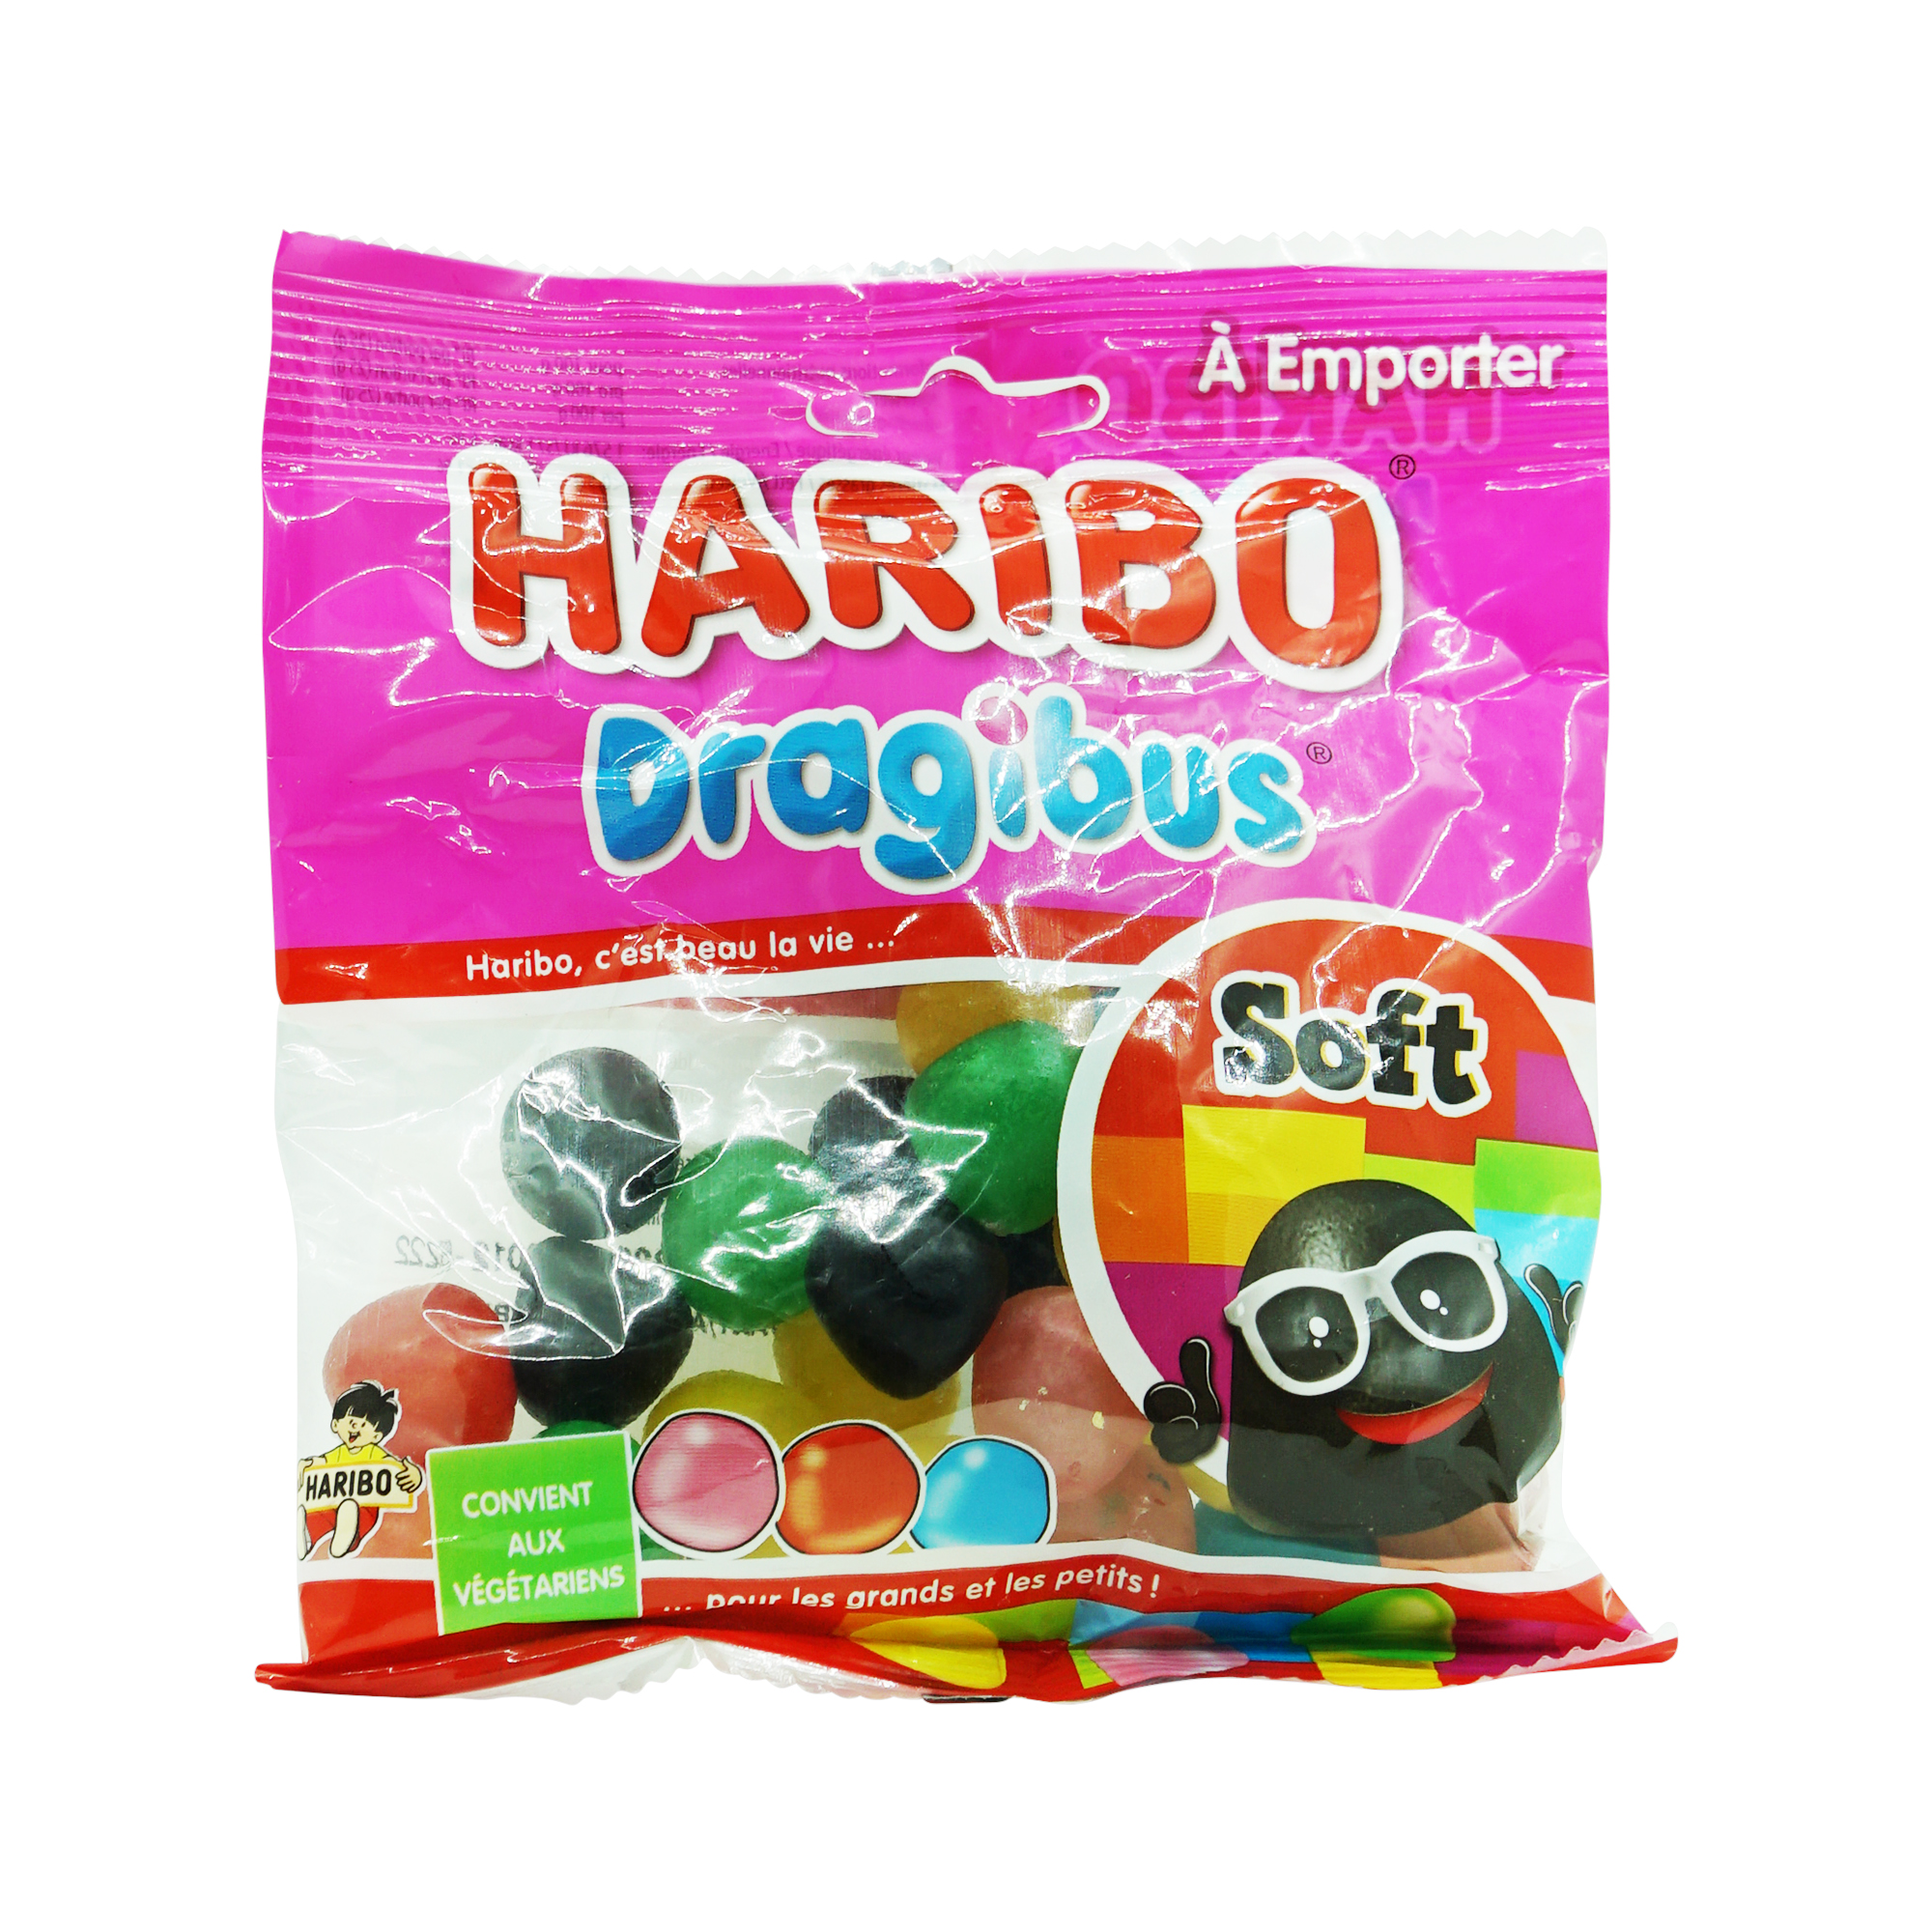 Soft gummy mixed fruit flavor Dragibus Gummy candies: the soft colo